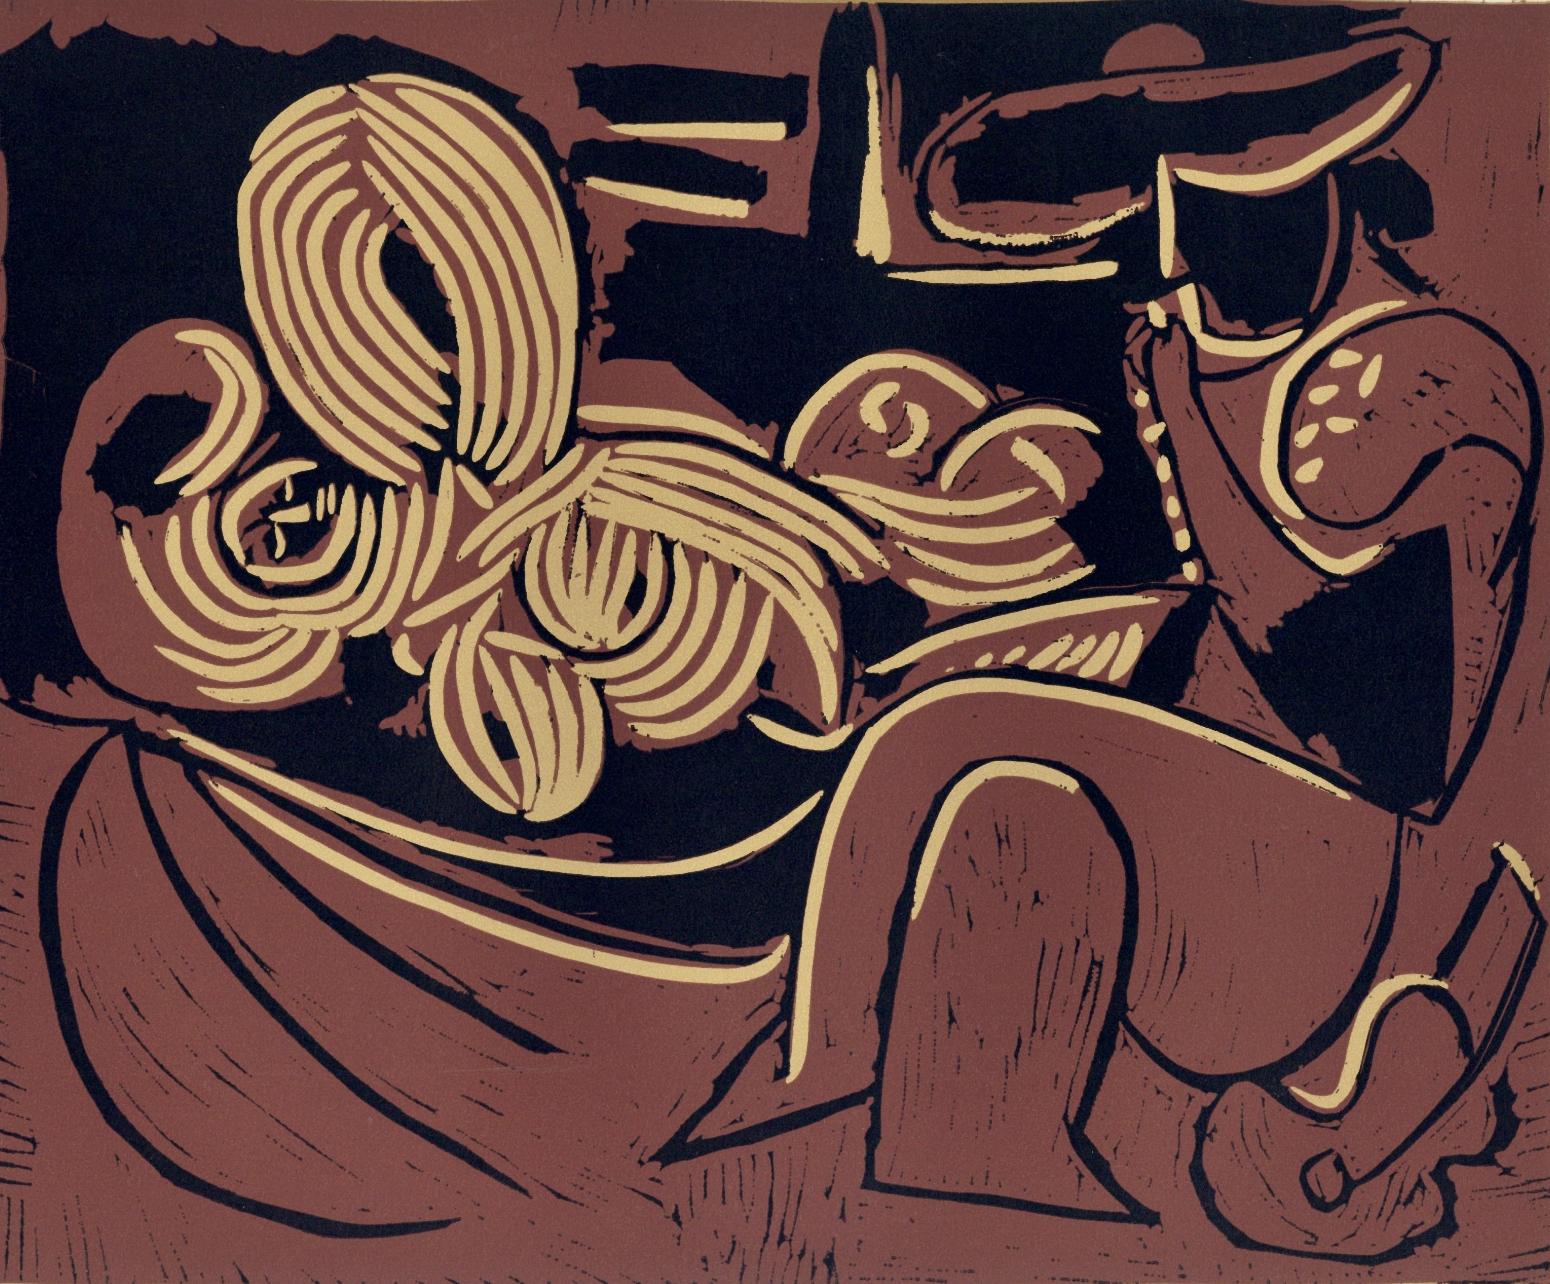 Picasso, The Aubade with Sleeping Woman, Pablo Picasso-Linogravures (after)